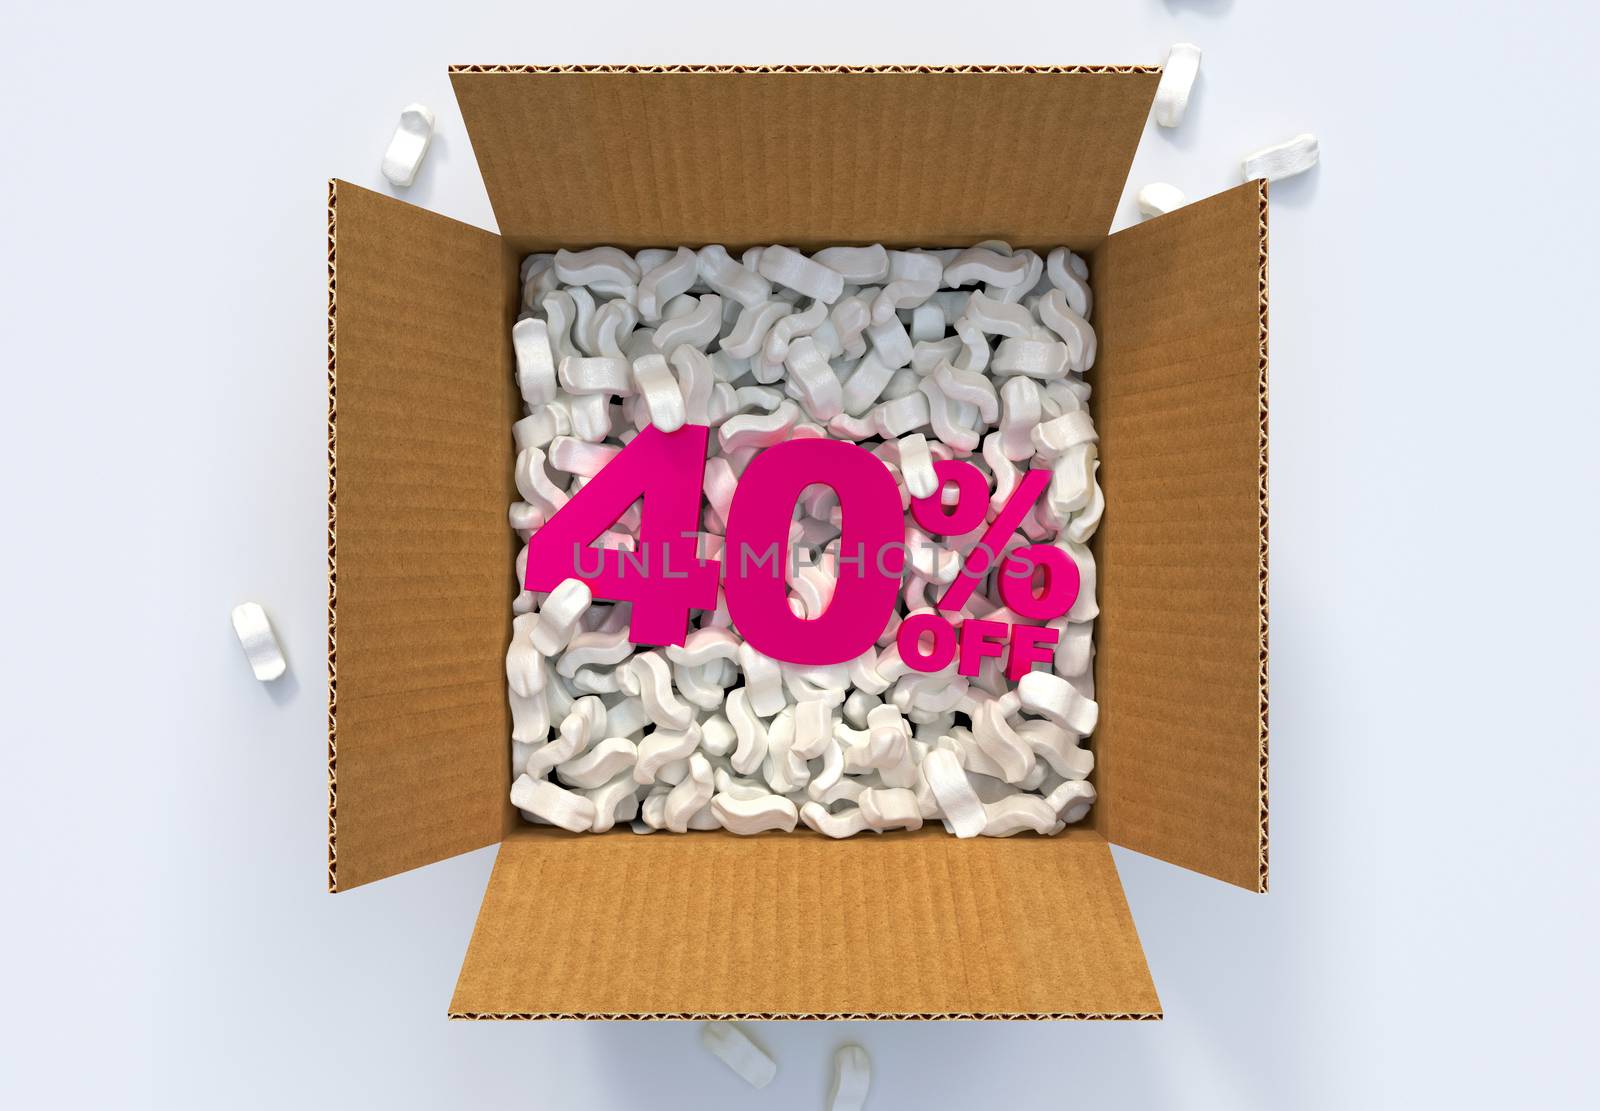 Cardboard Box with shipping peanuts and 40 percent off sign